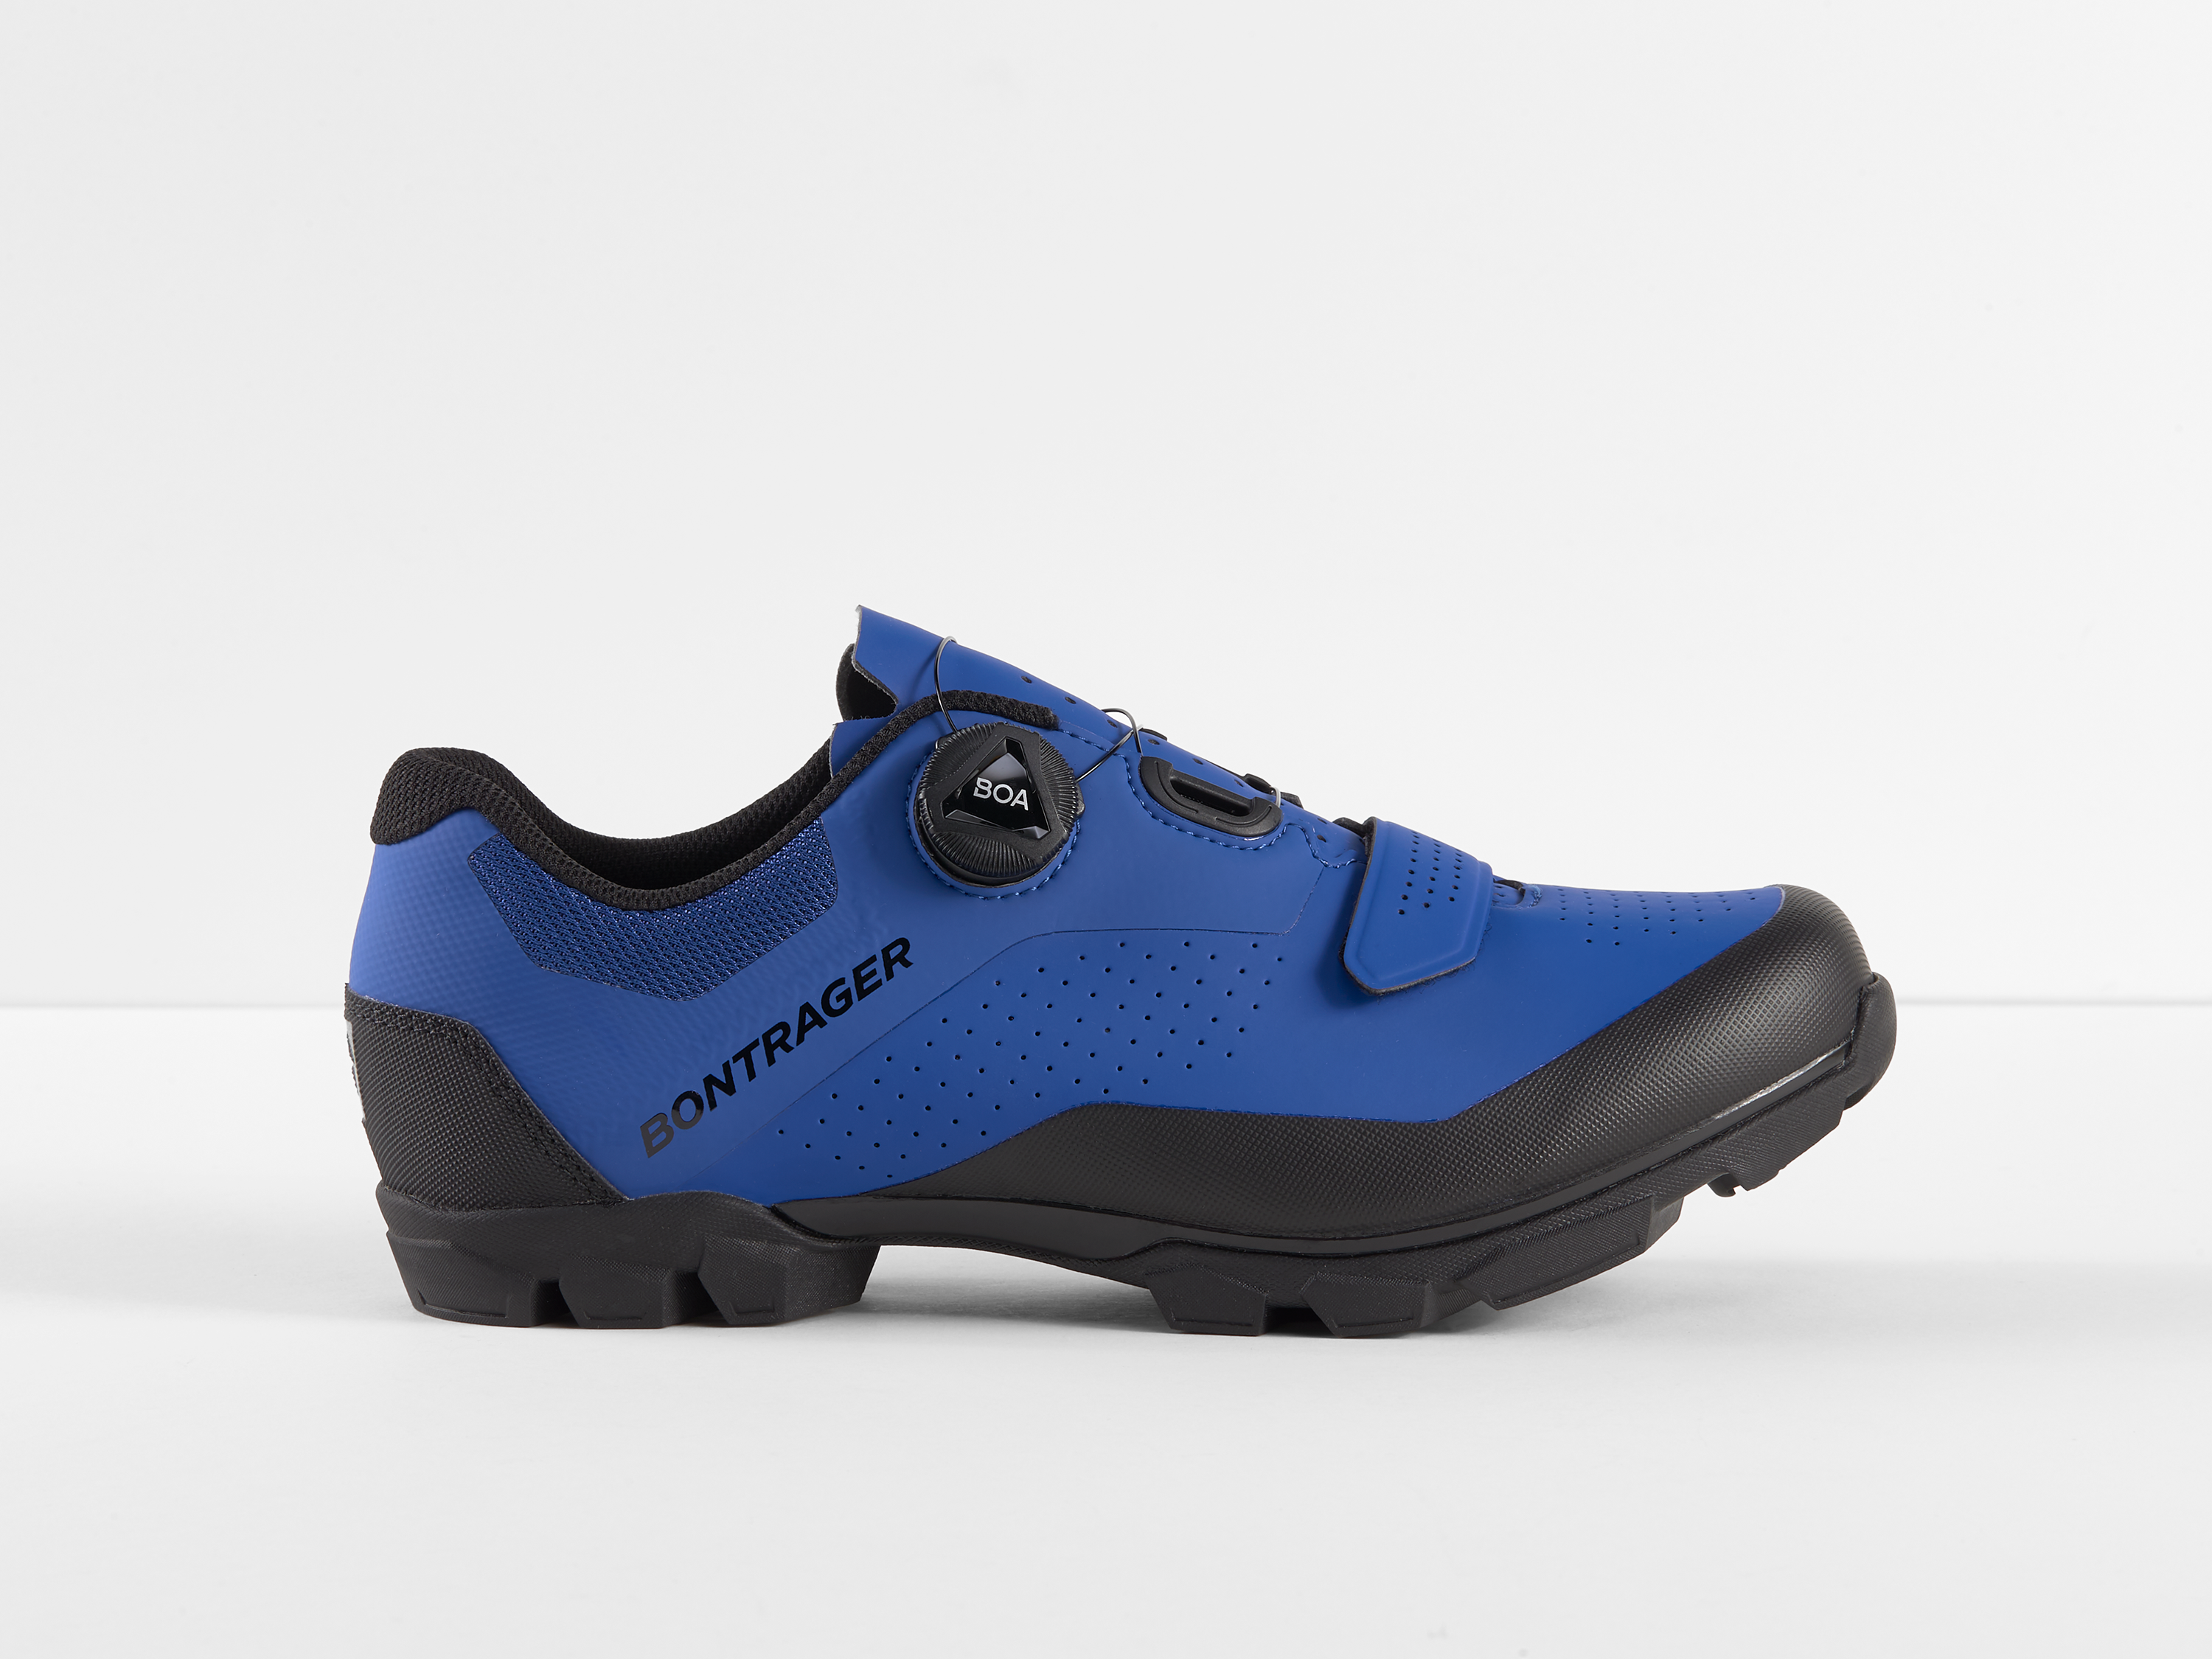 Bontrager Foray Mountain Chaussures